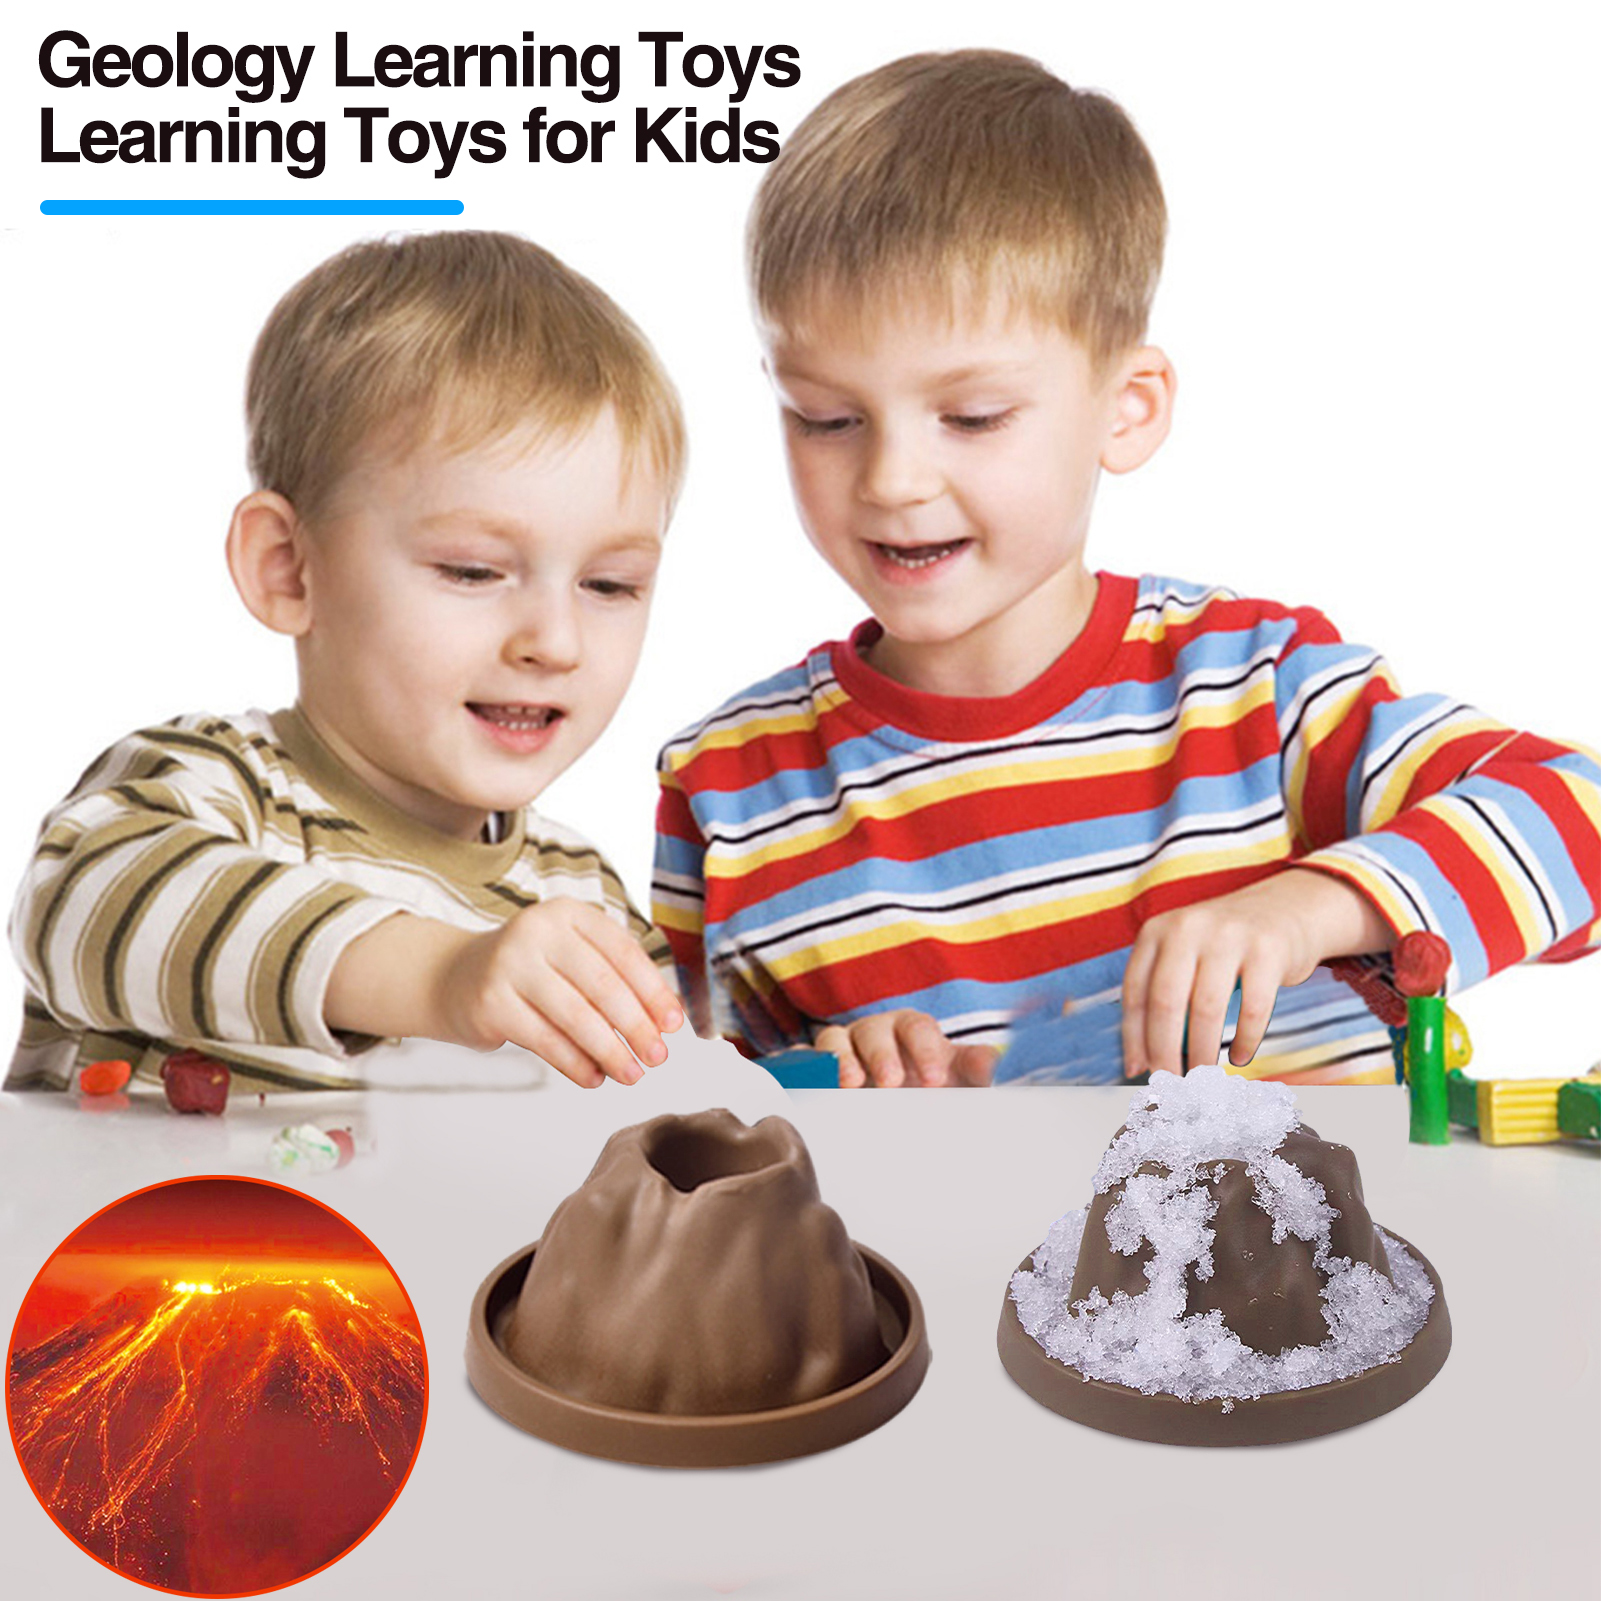 Learning Toys for Kids Fun Volcano Science Kit for Kids Learn Chemistry